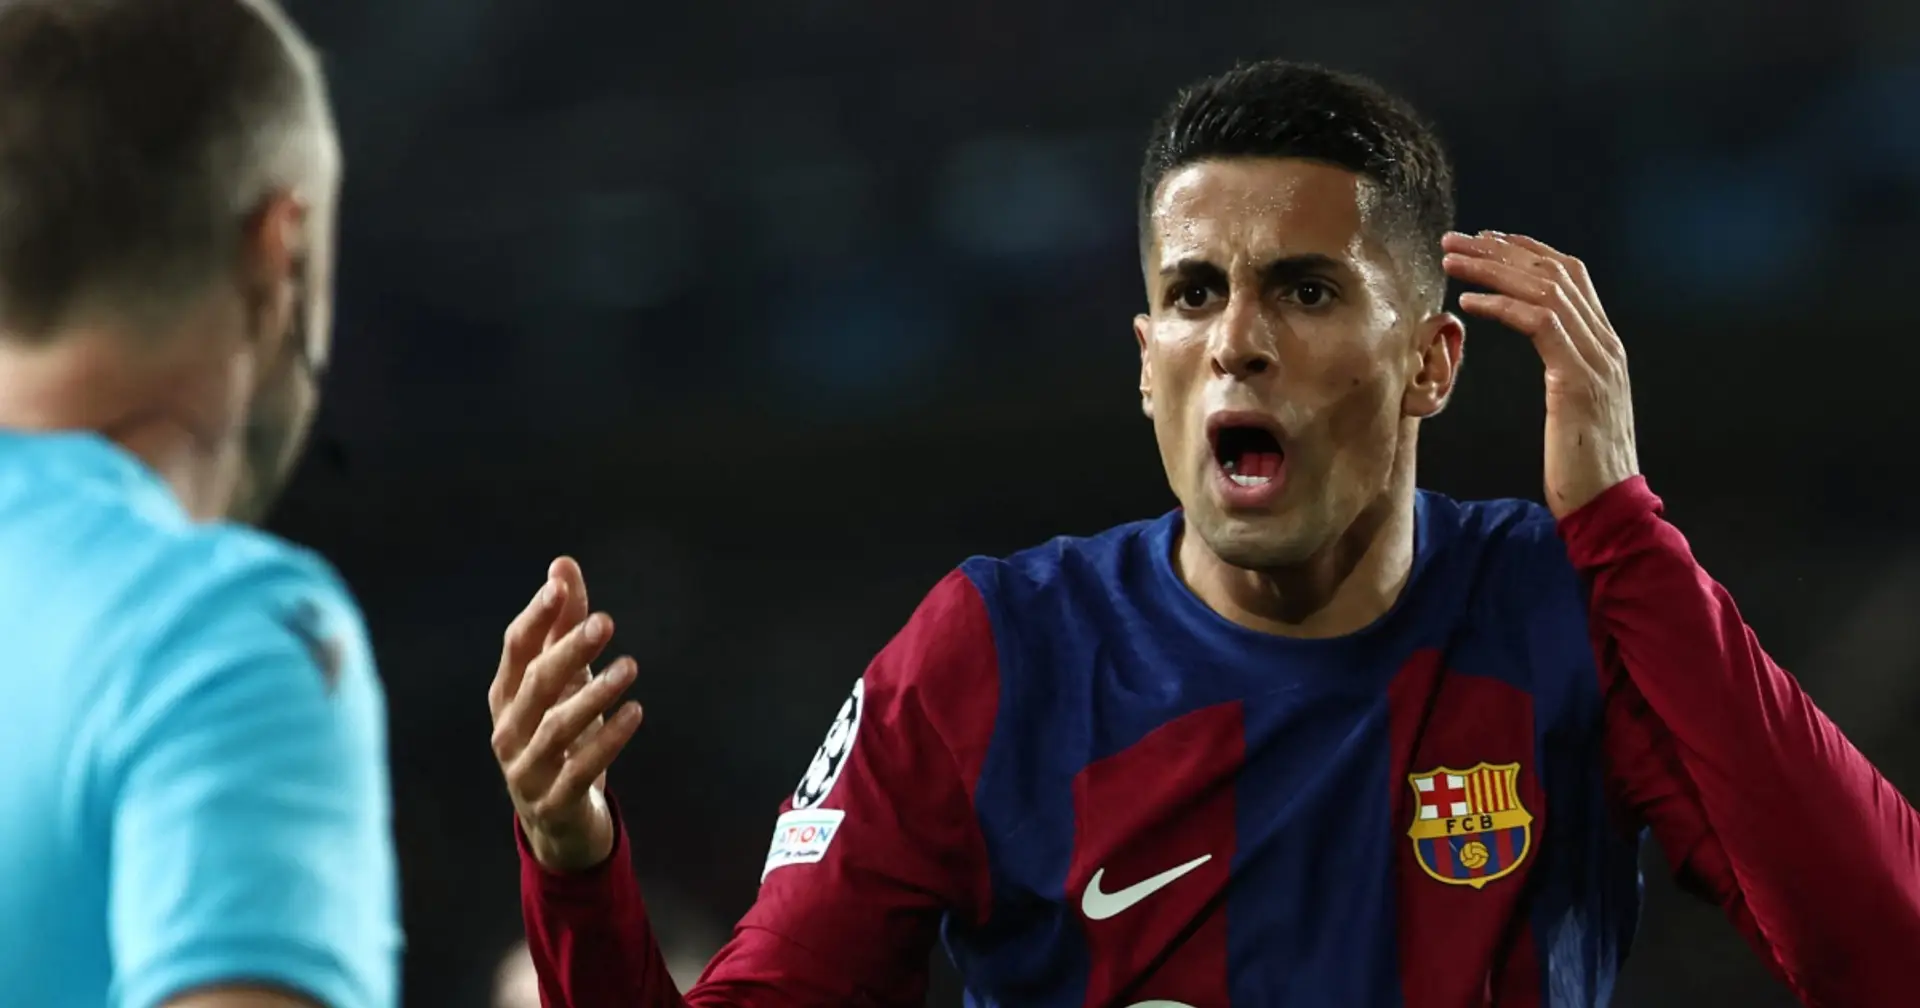 Joao Cancelo future at Barca in 'serious doubt' over big mistakes